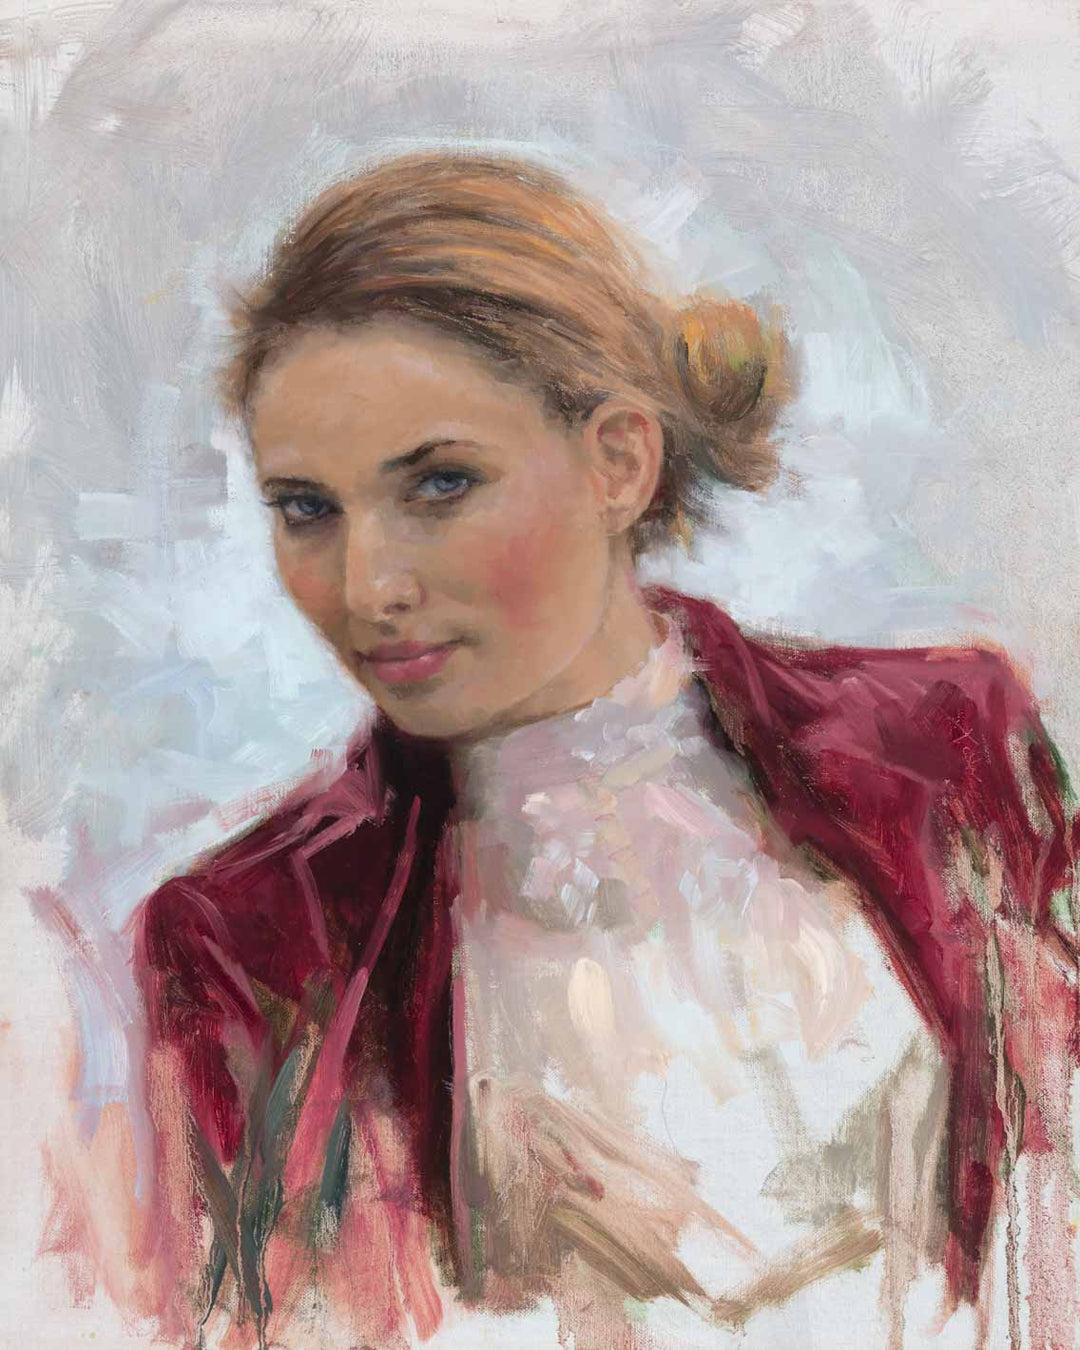 Original oil portrait painting of beautiful young woman with bling hair and blue eyes wearing vintage clothing by impressionist artist Talya Johnson